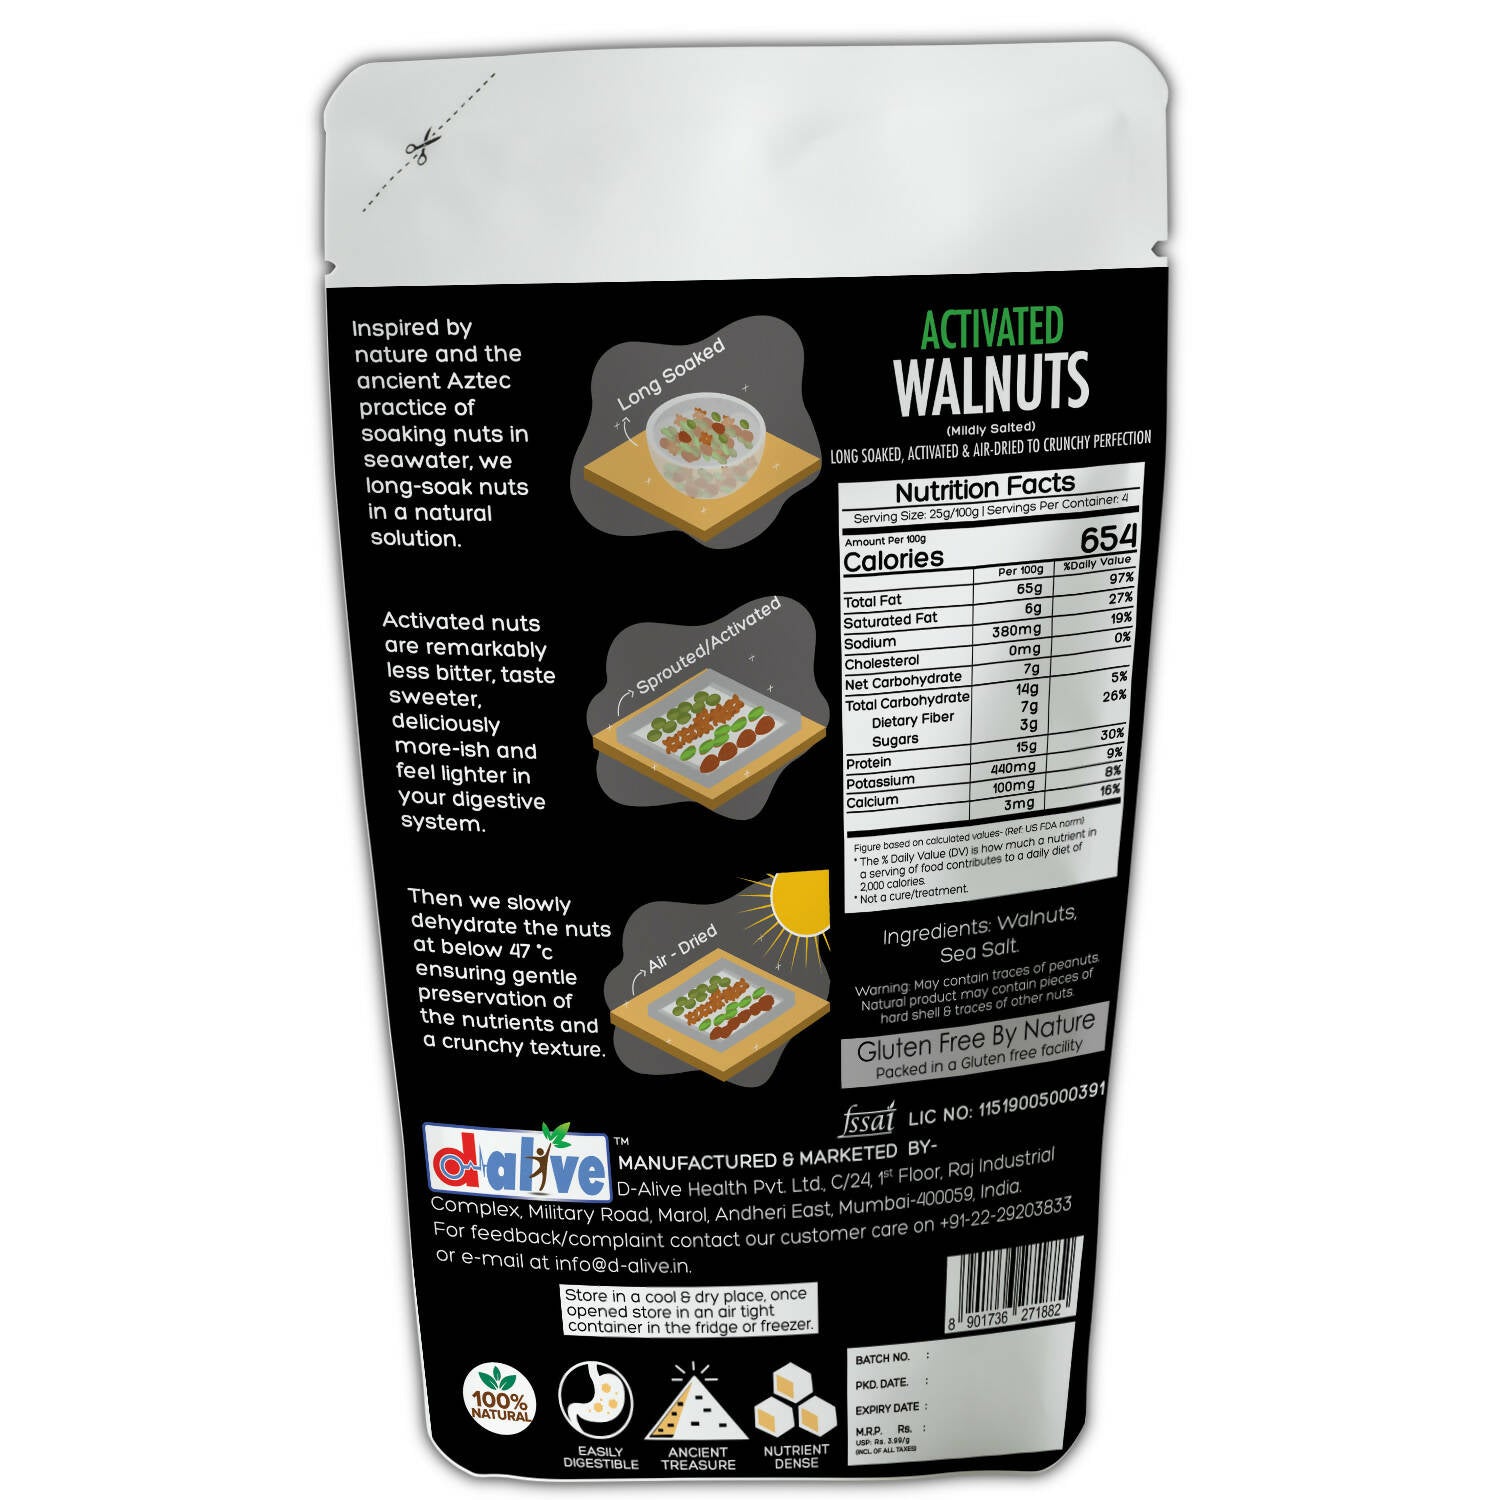 "Activated/Sprouted Walnuts - Mildly Salted (100% Natural, Long Soaked & Air Dried to Crunchy Perfection) - 100g "